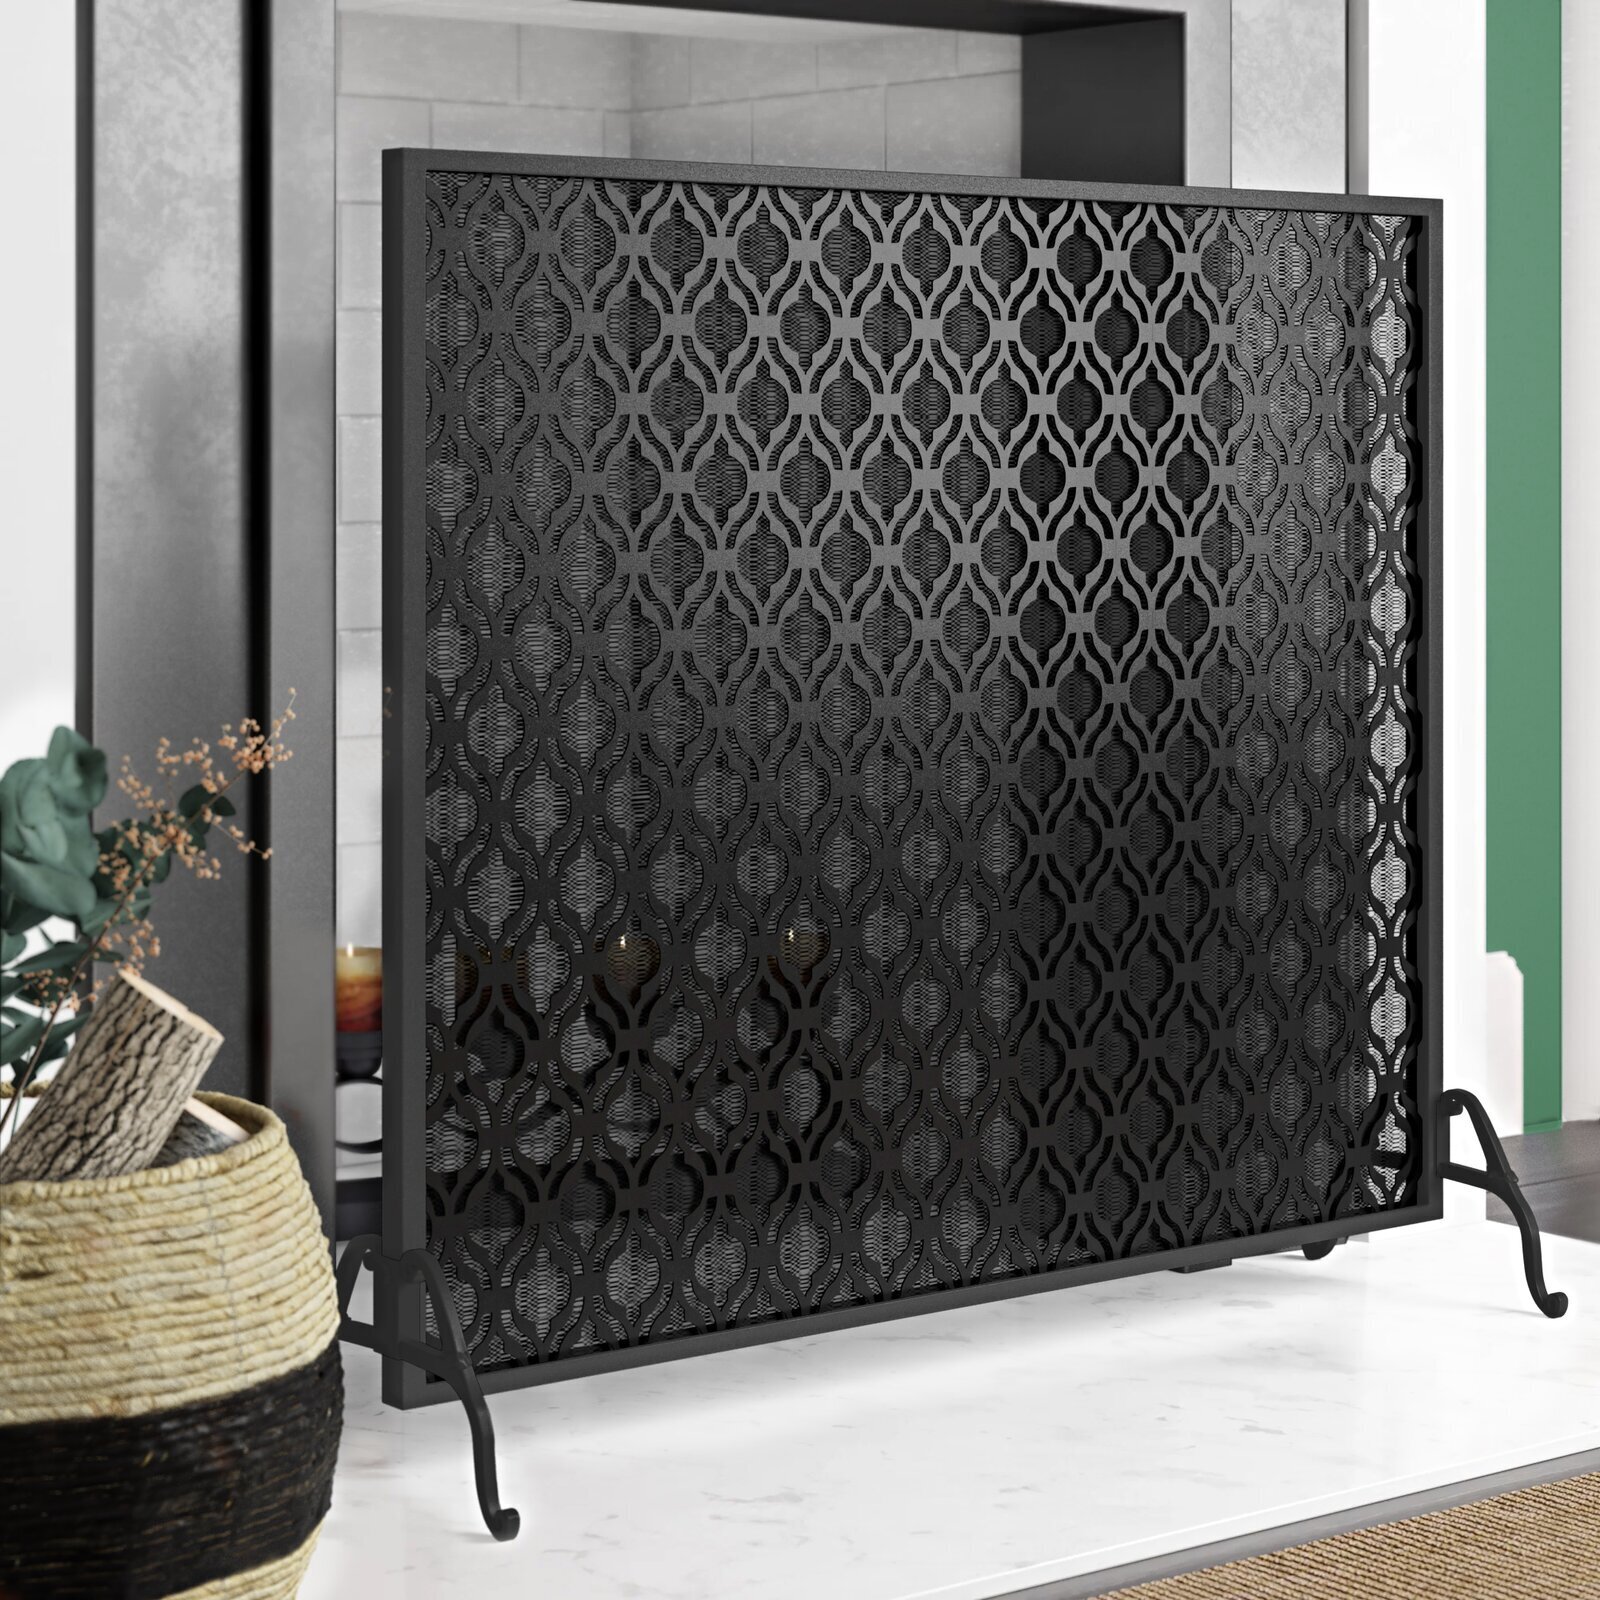 Tuscan styled Lifted Iron Fireplace Screen